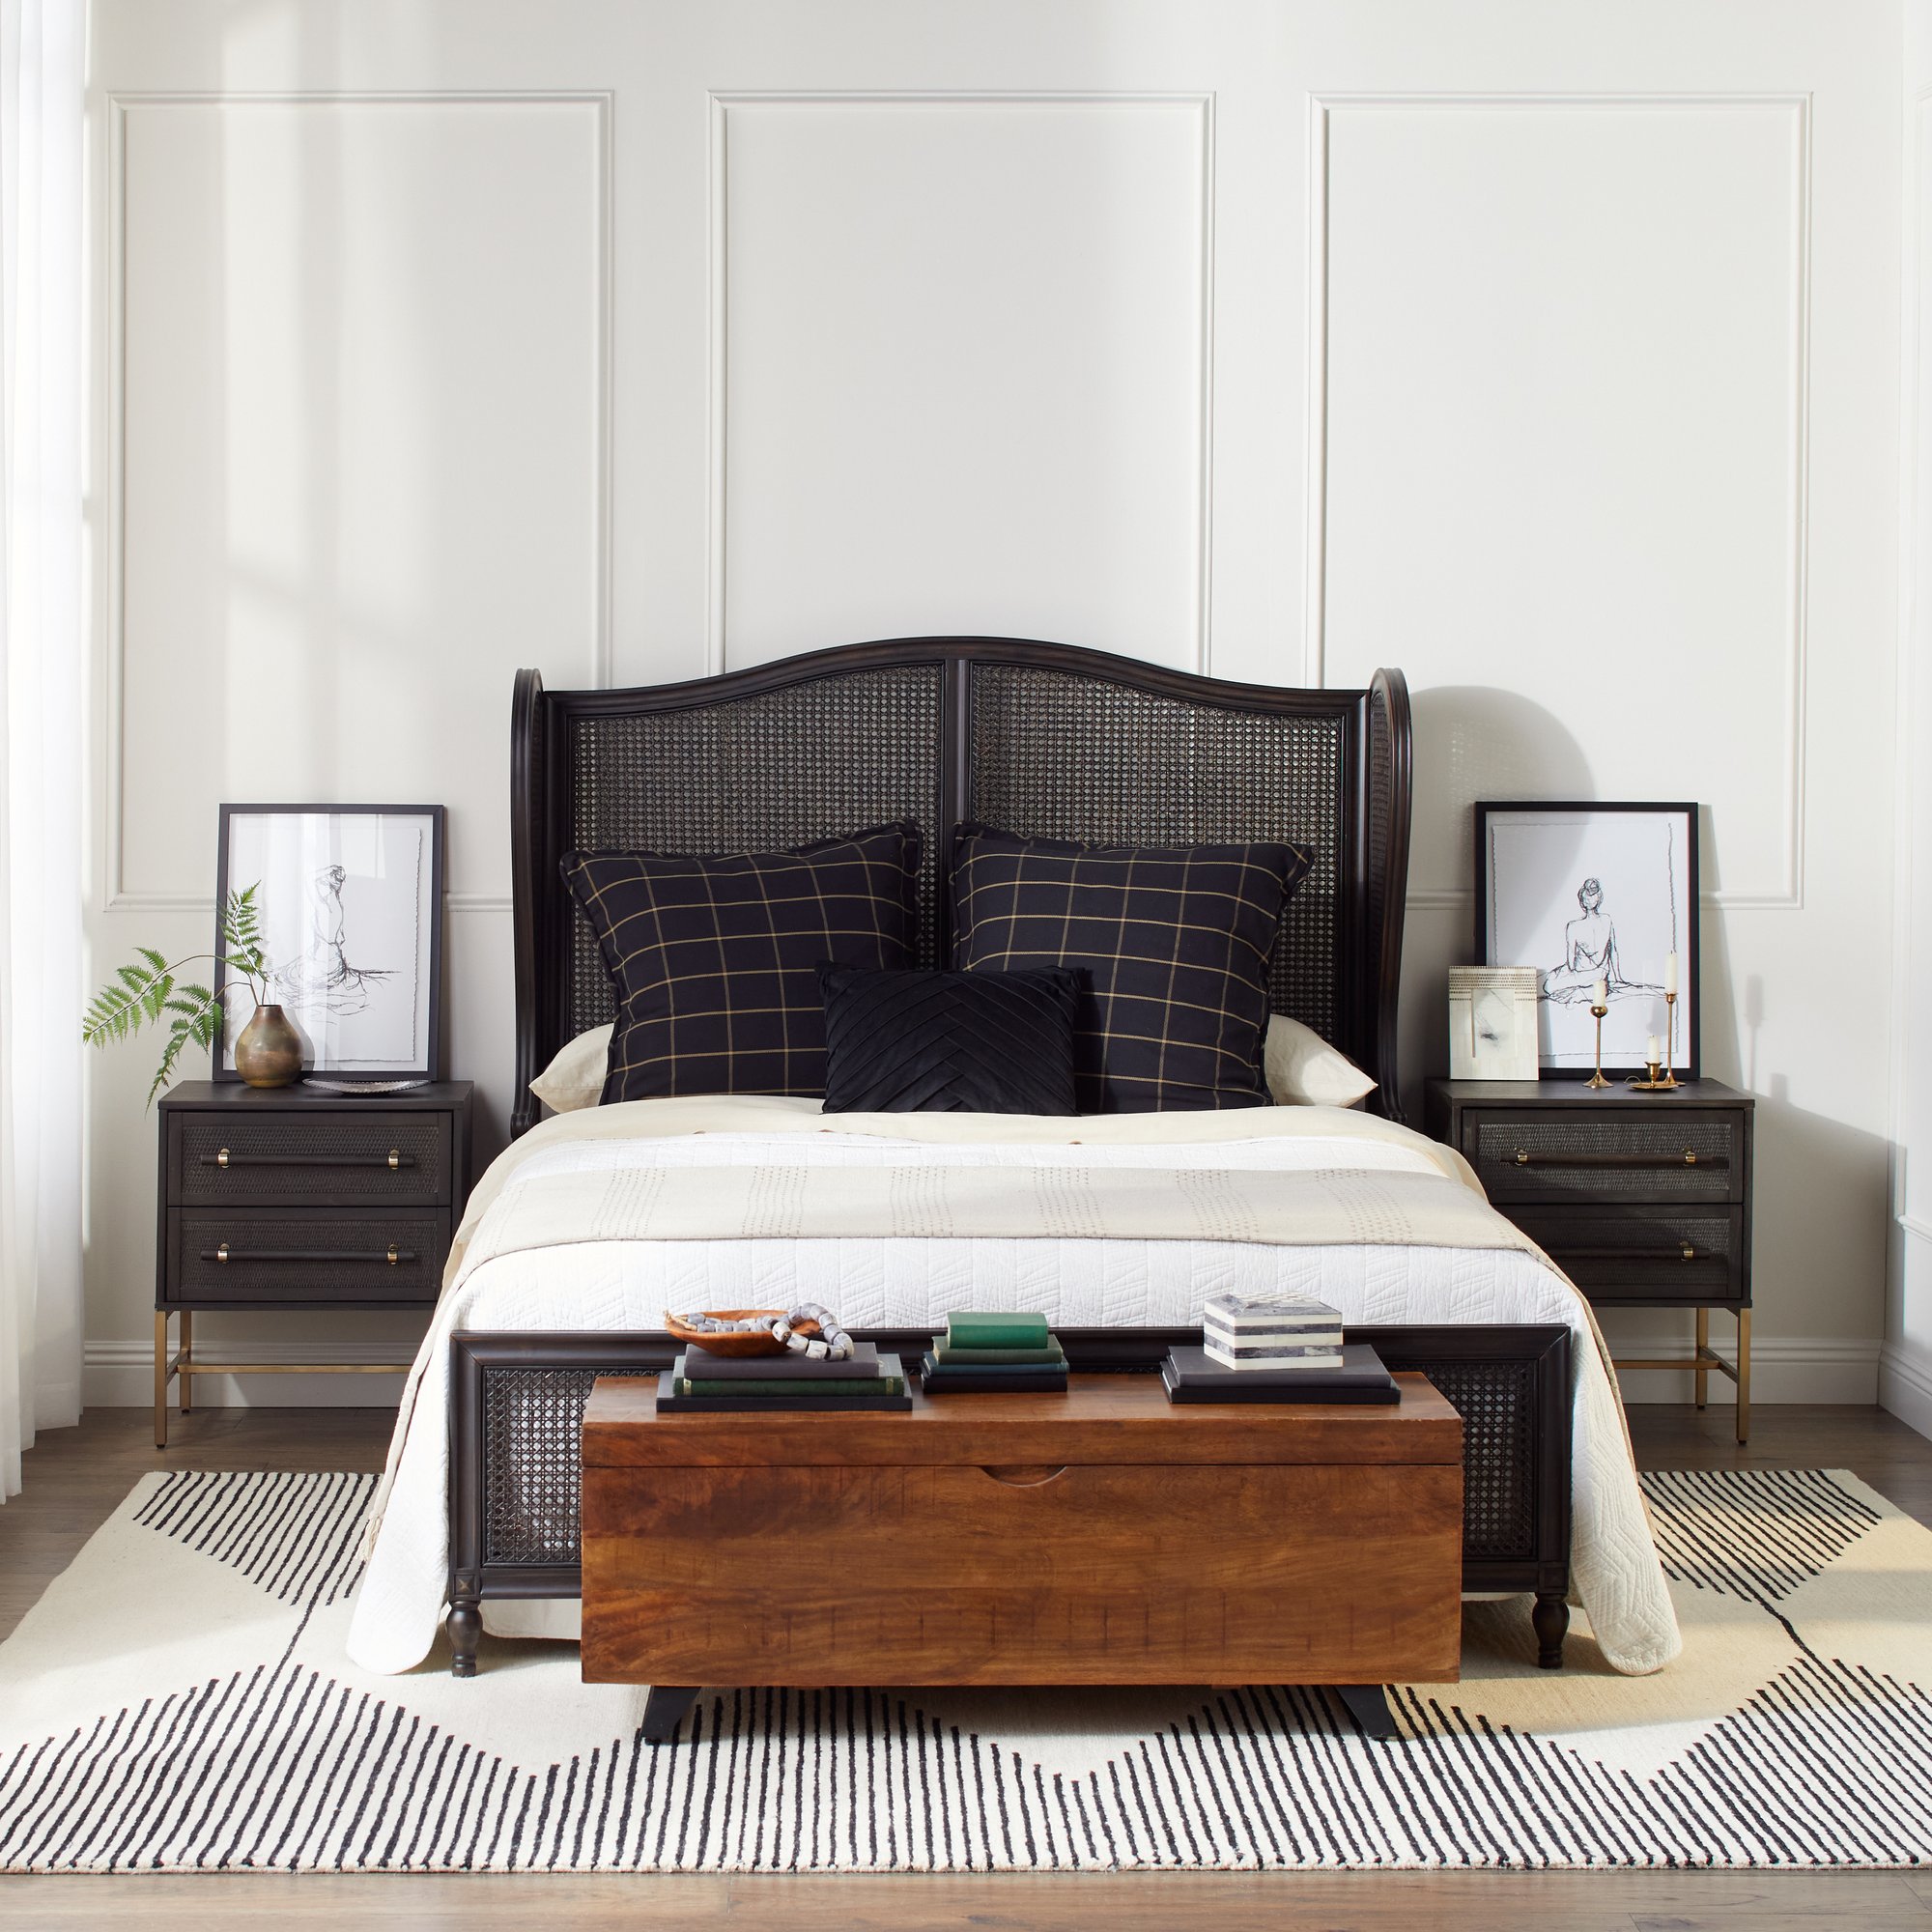 save an extra 10% on Select Bedroom Furniture*